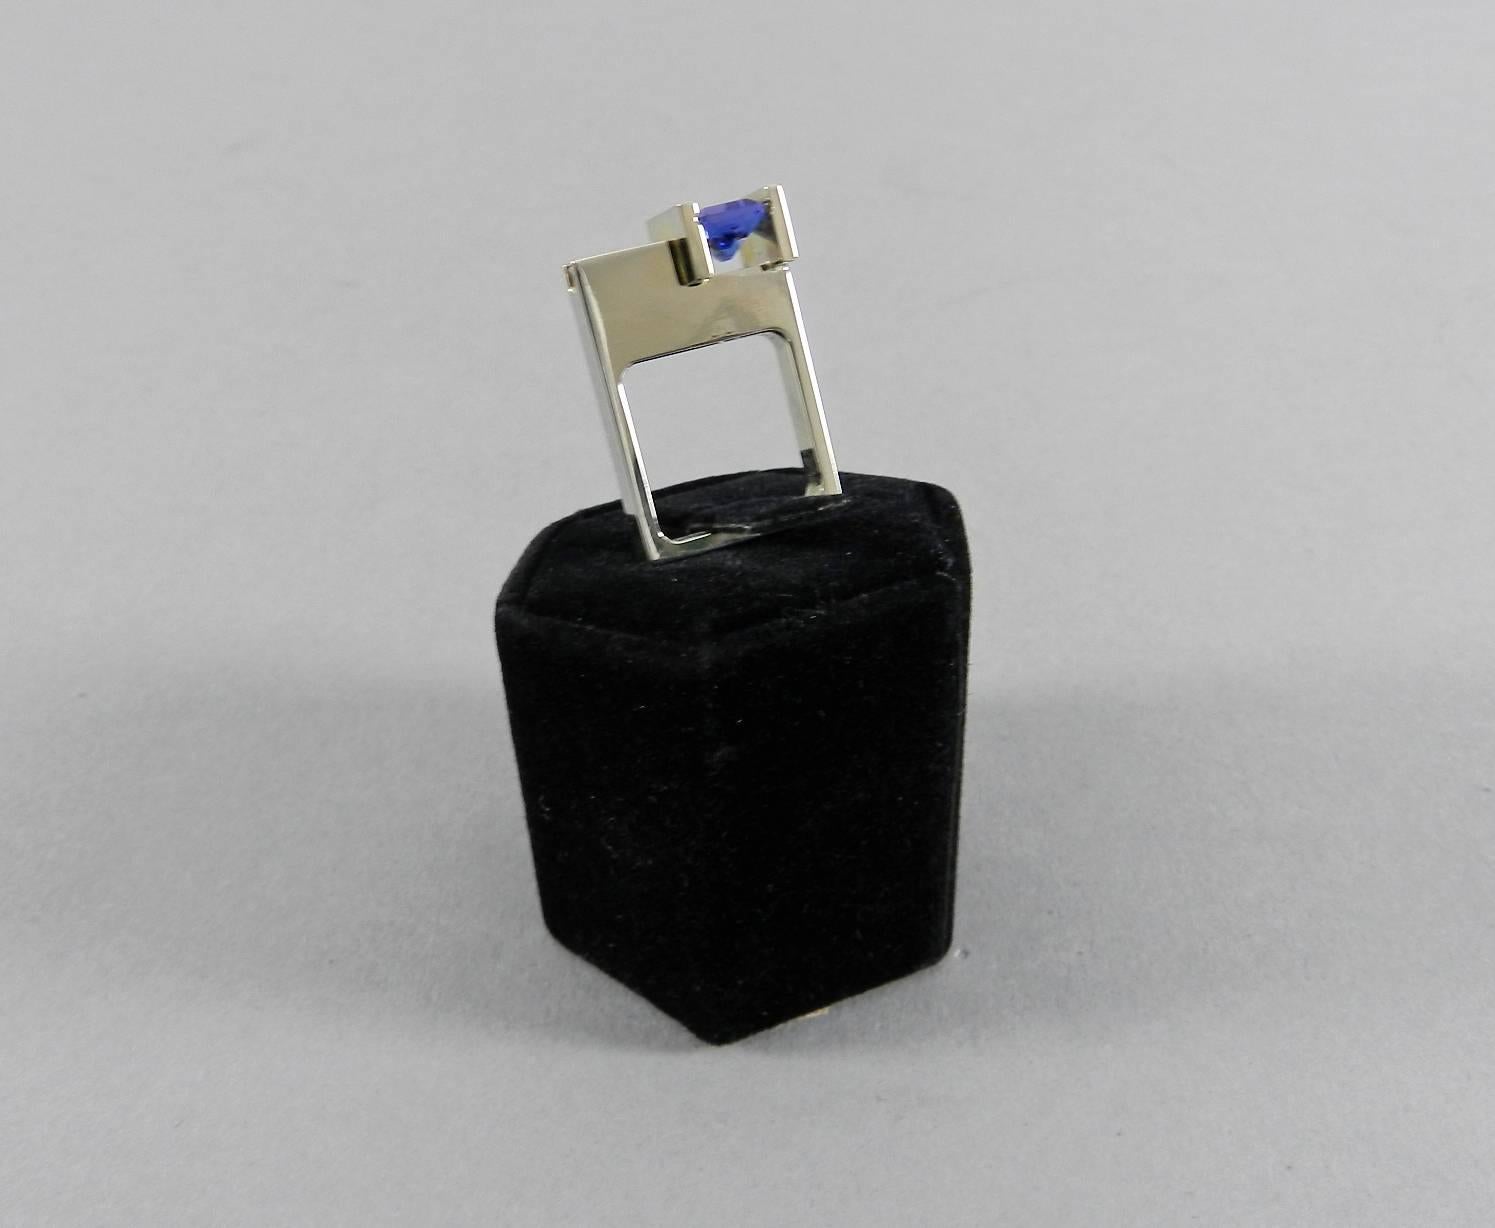 Custom Fancy design cocktail ring with tanzaite and diamonds set in 18k white gold. Angular Modernist abstract design with square shaped body. Signed Trisko 18k. 

1 radiant cut channel set tanzanite (approx. 2.08 ct, VS type 1) and 2 baguette cut